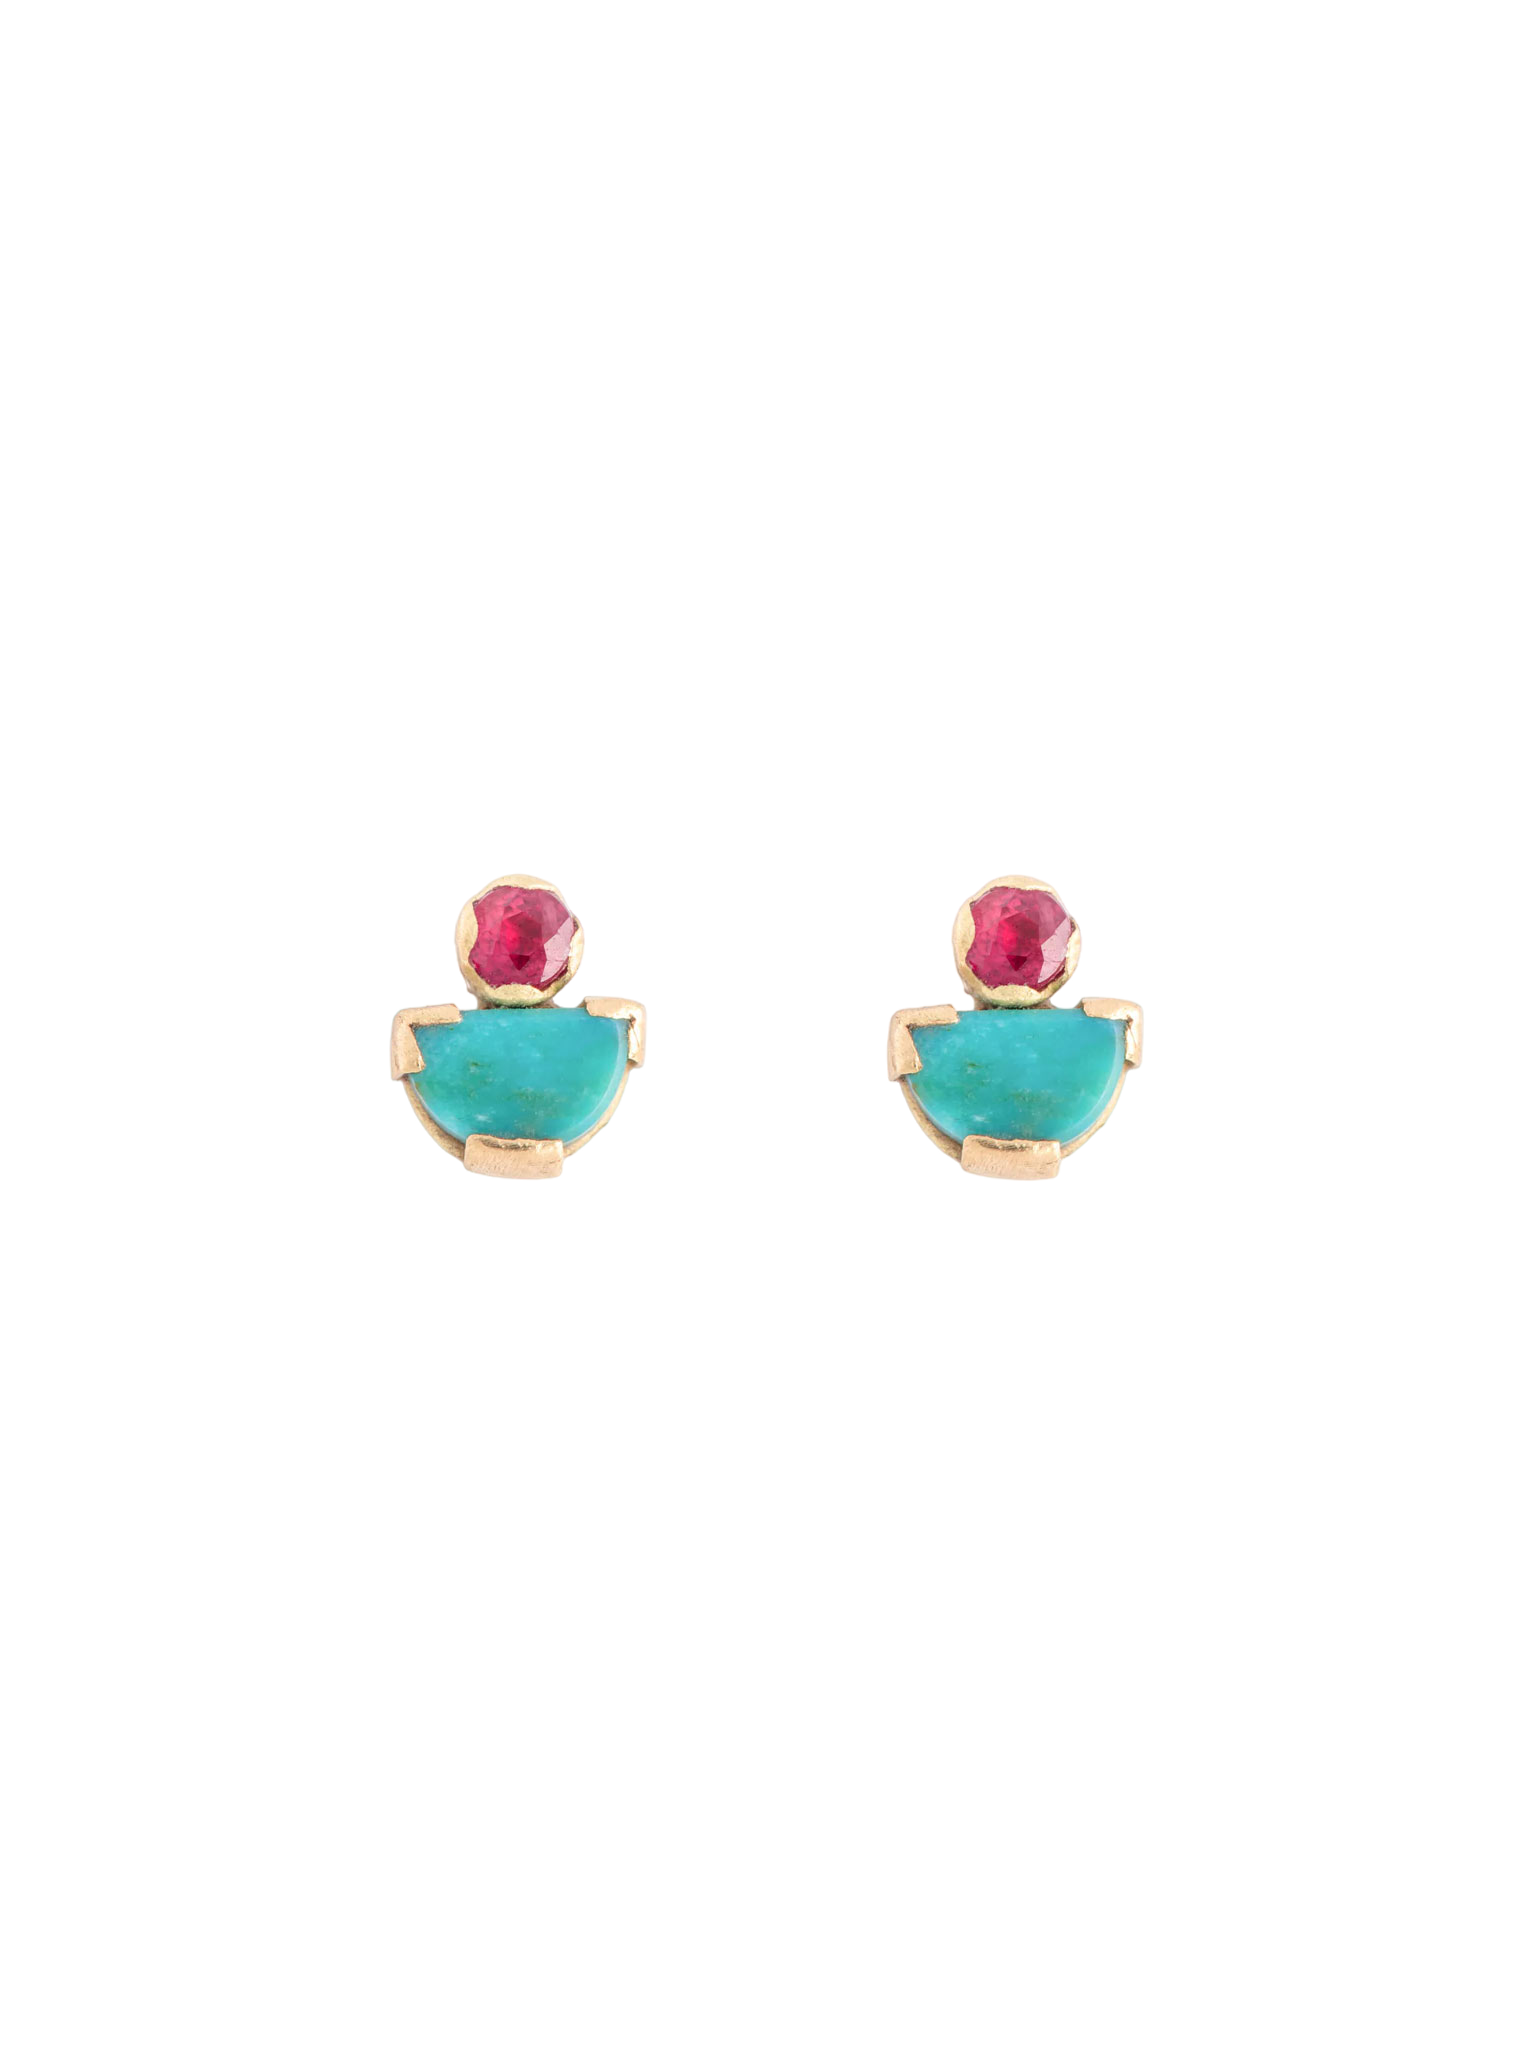 Ruby and turquoise mina studs